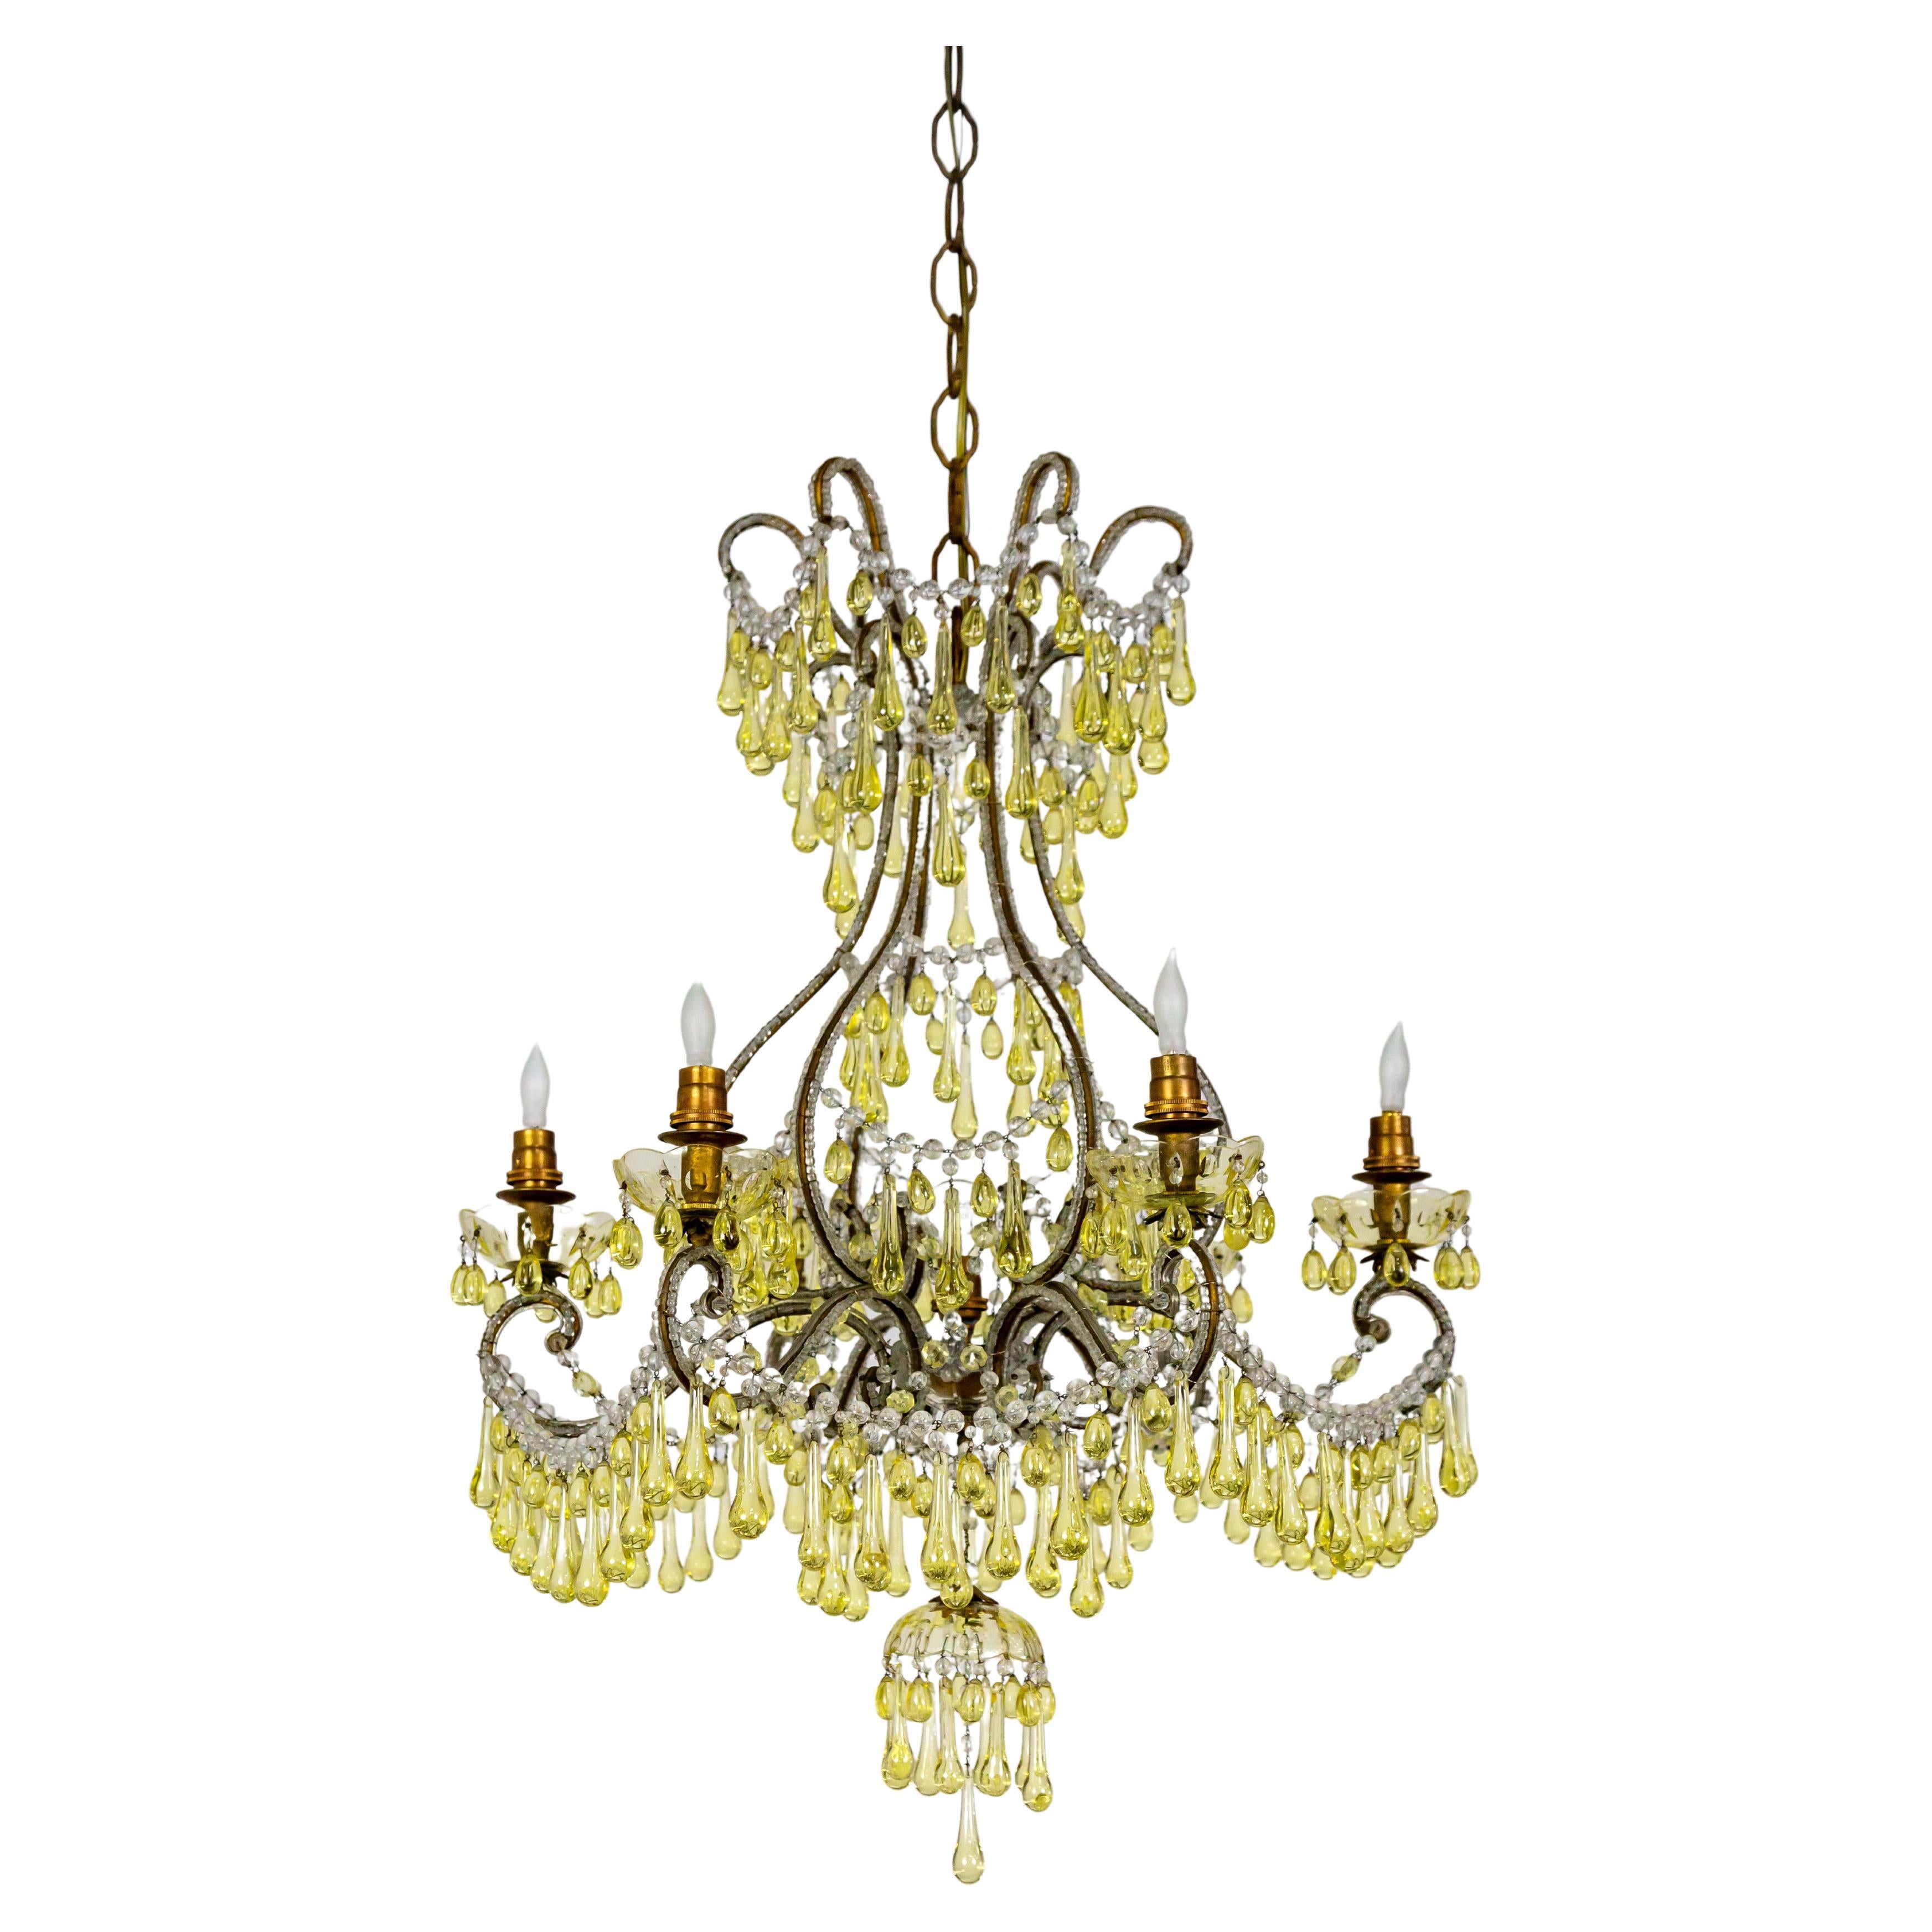 19th Century Rare Pale Yellow Crystal Drops Birdcage Chandelier For Sale